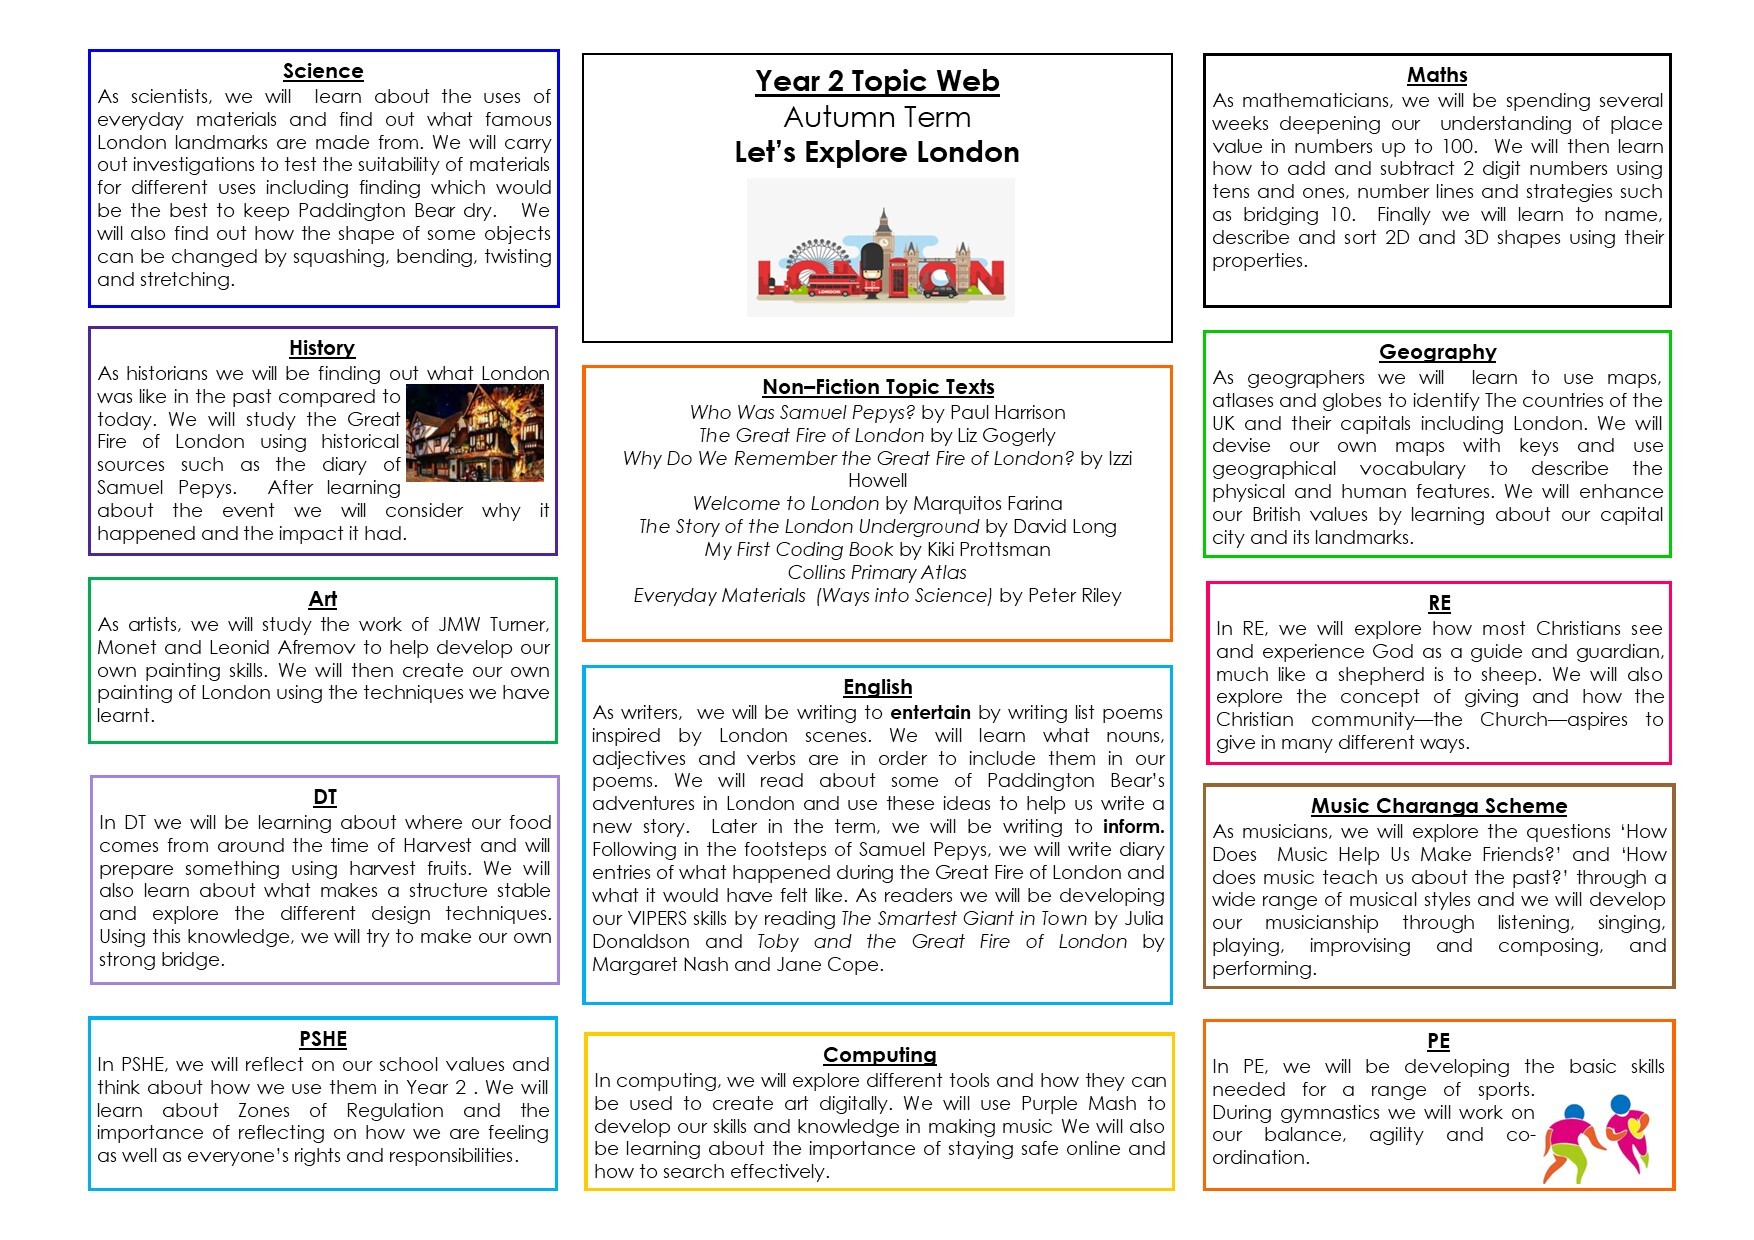 Year 2 Topic Web   Let's Explore London